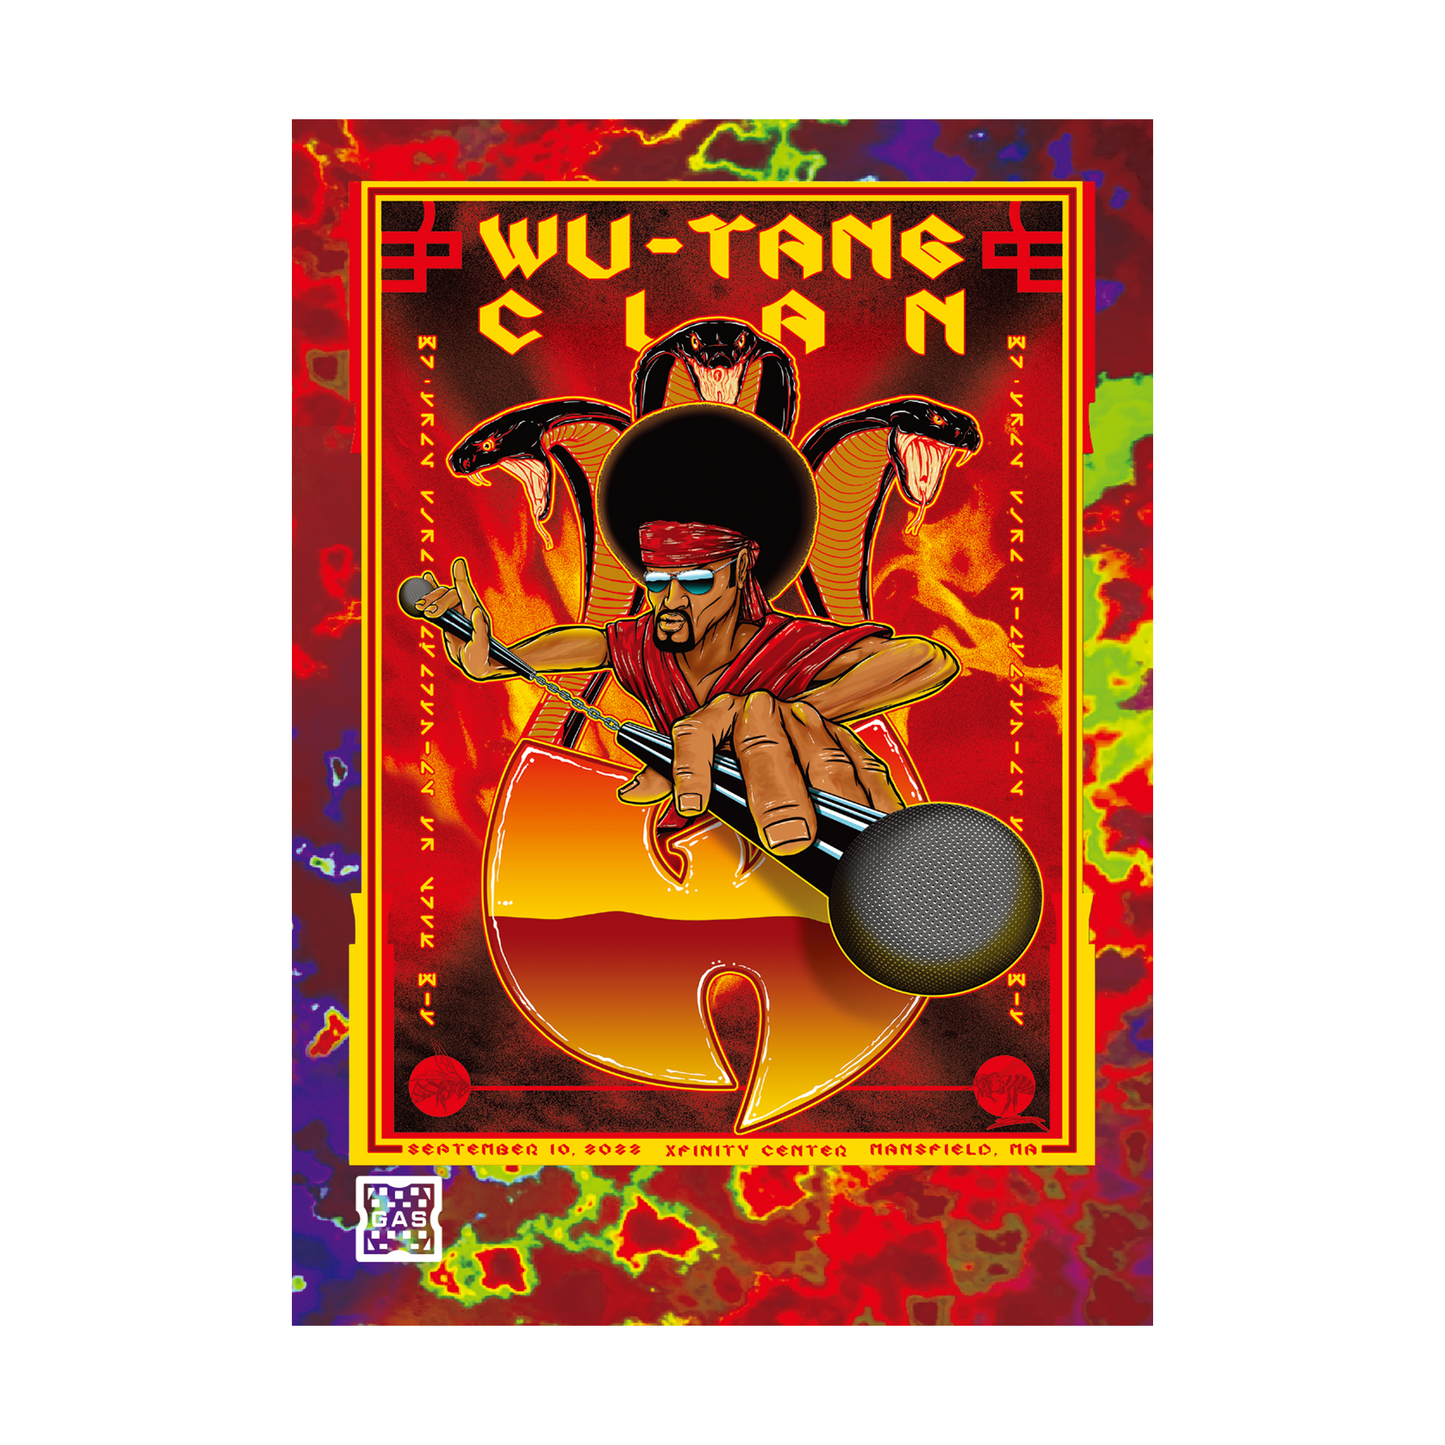 GAS Wu-Tang Clan Mansfield, MA Limited Edition Magma Foil Card by Jose Pedraza